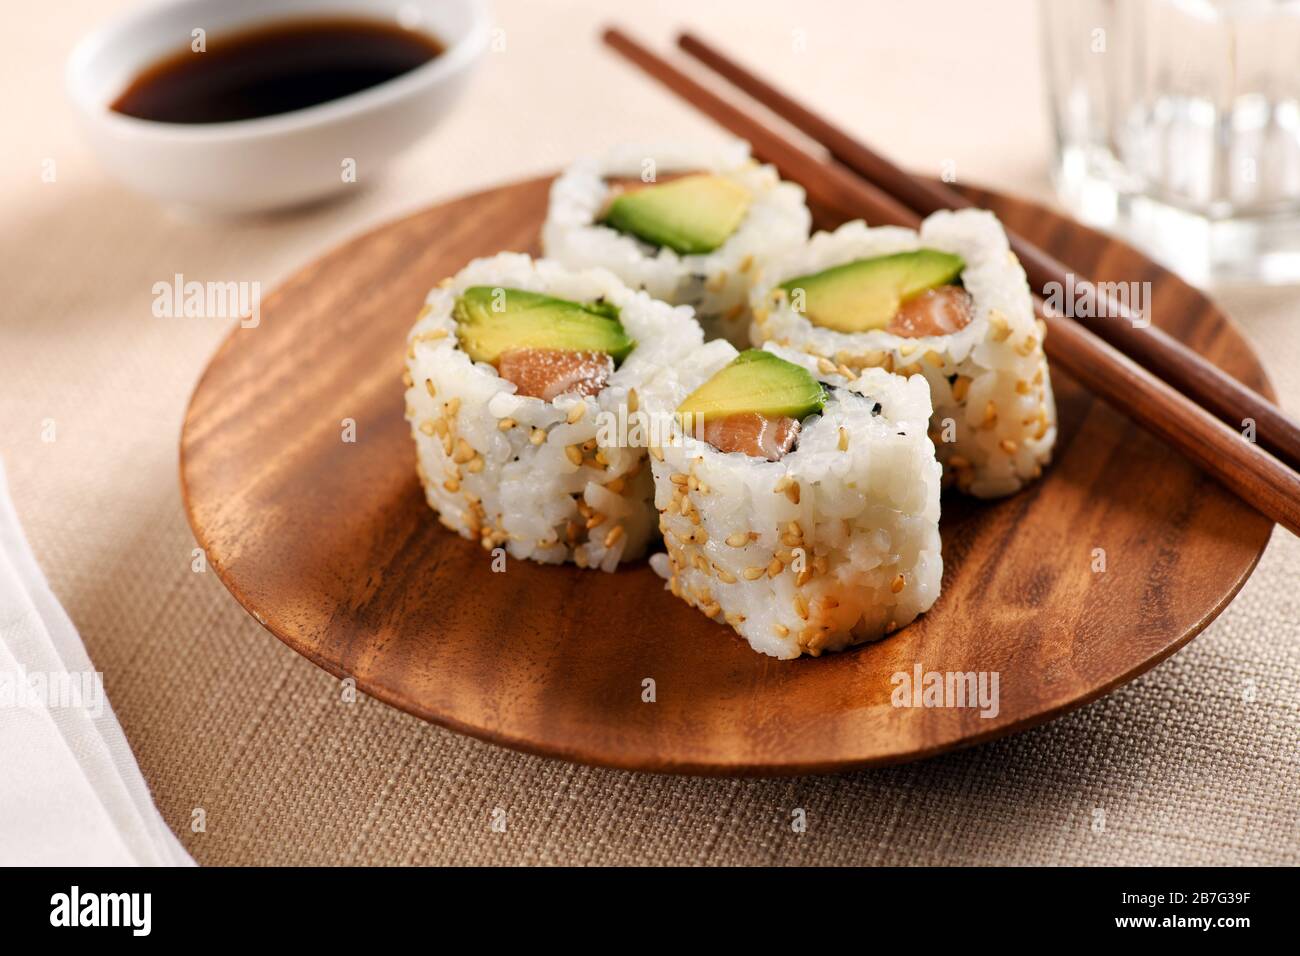 Four traditional uramaki sushi rolls with fresh raw salmon, avocado pear, nori and rice on a circular wood tray with chopsticks served at table on a l Stock Photo